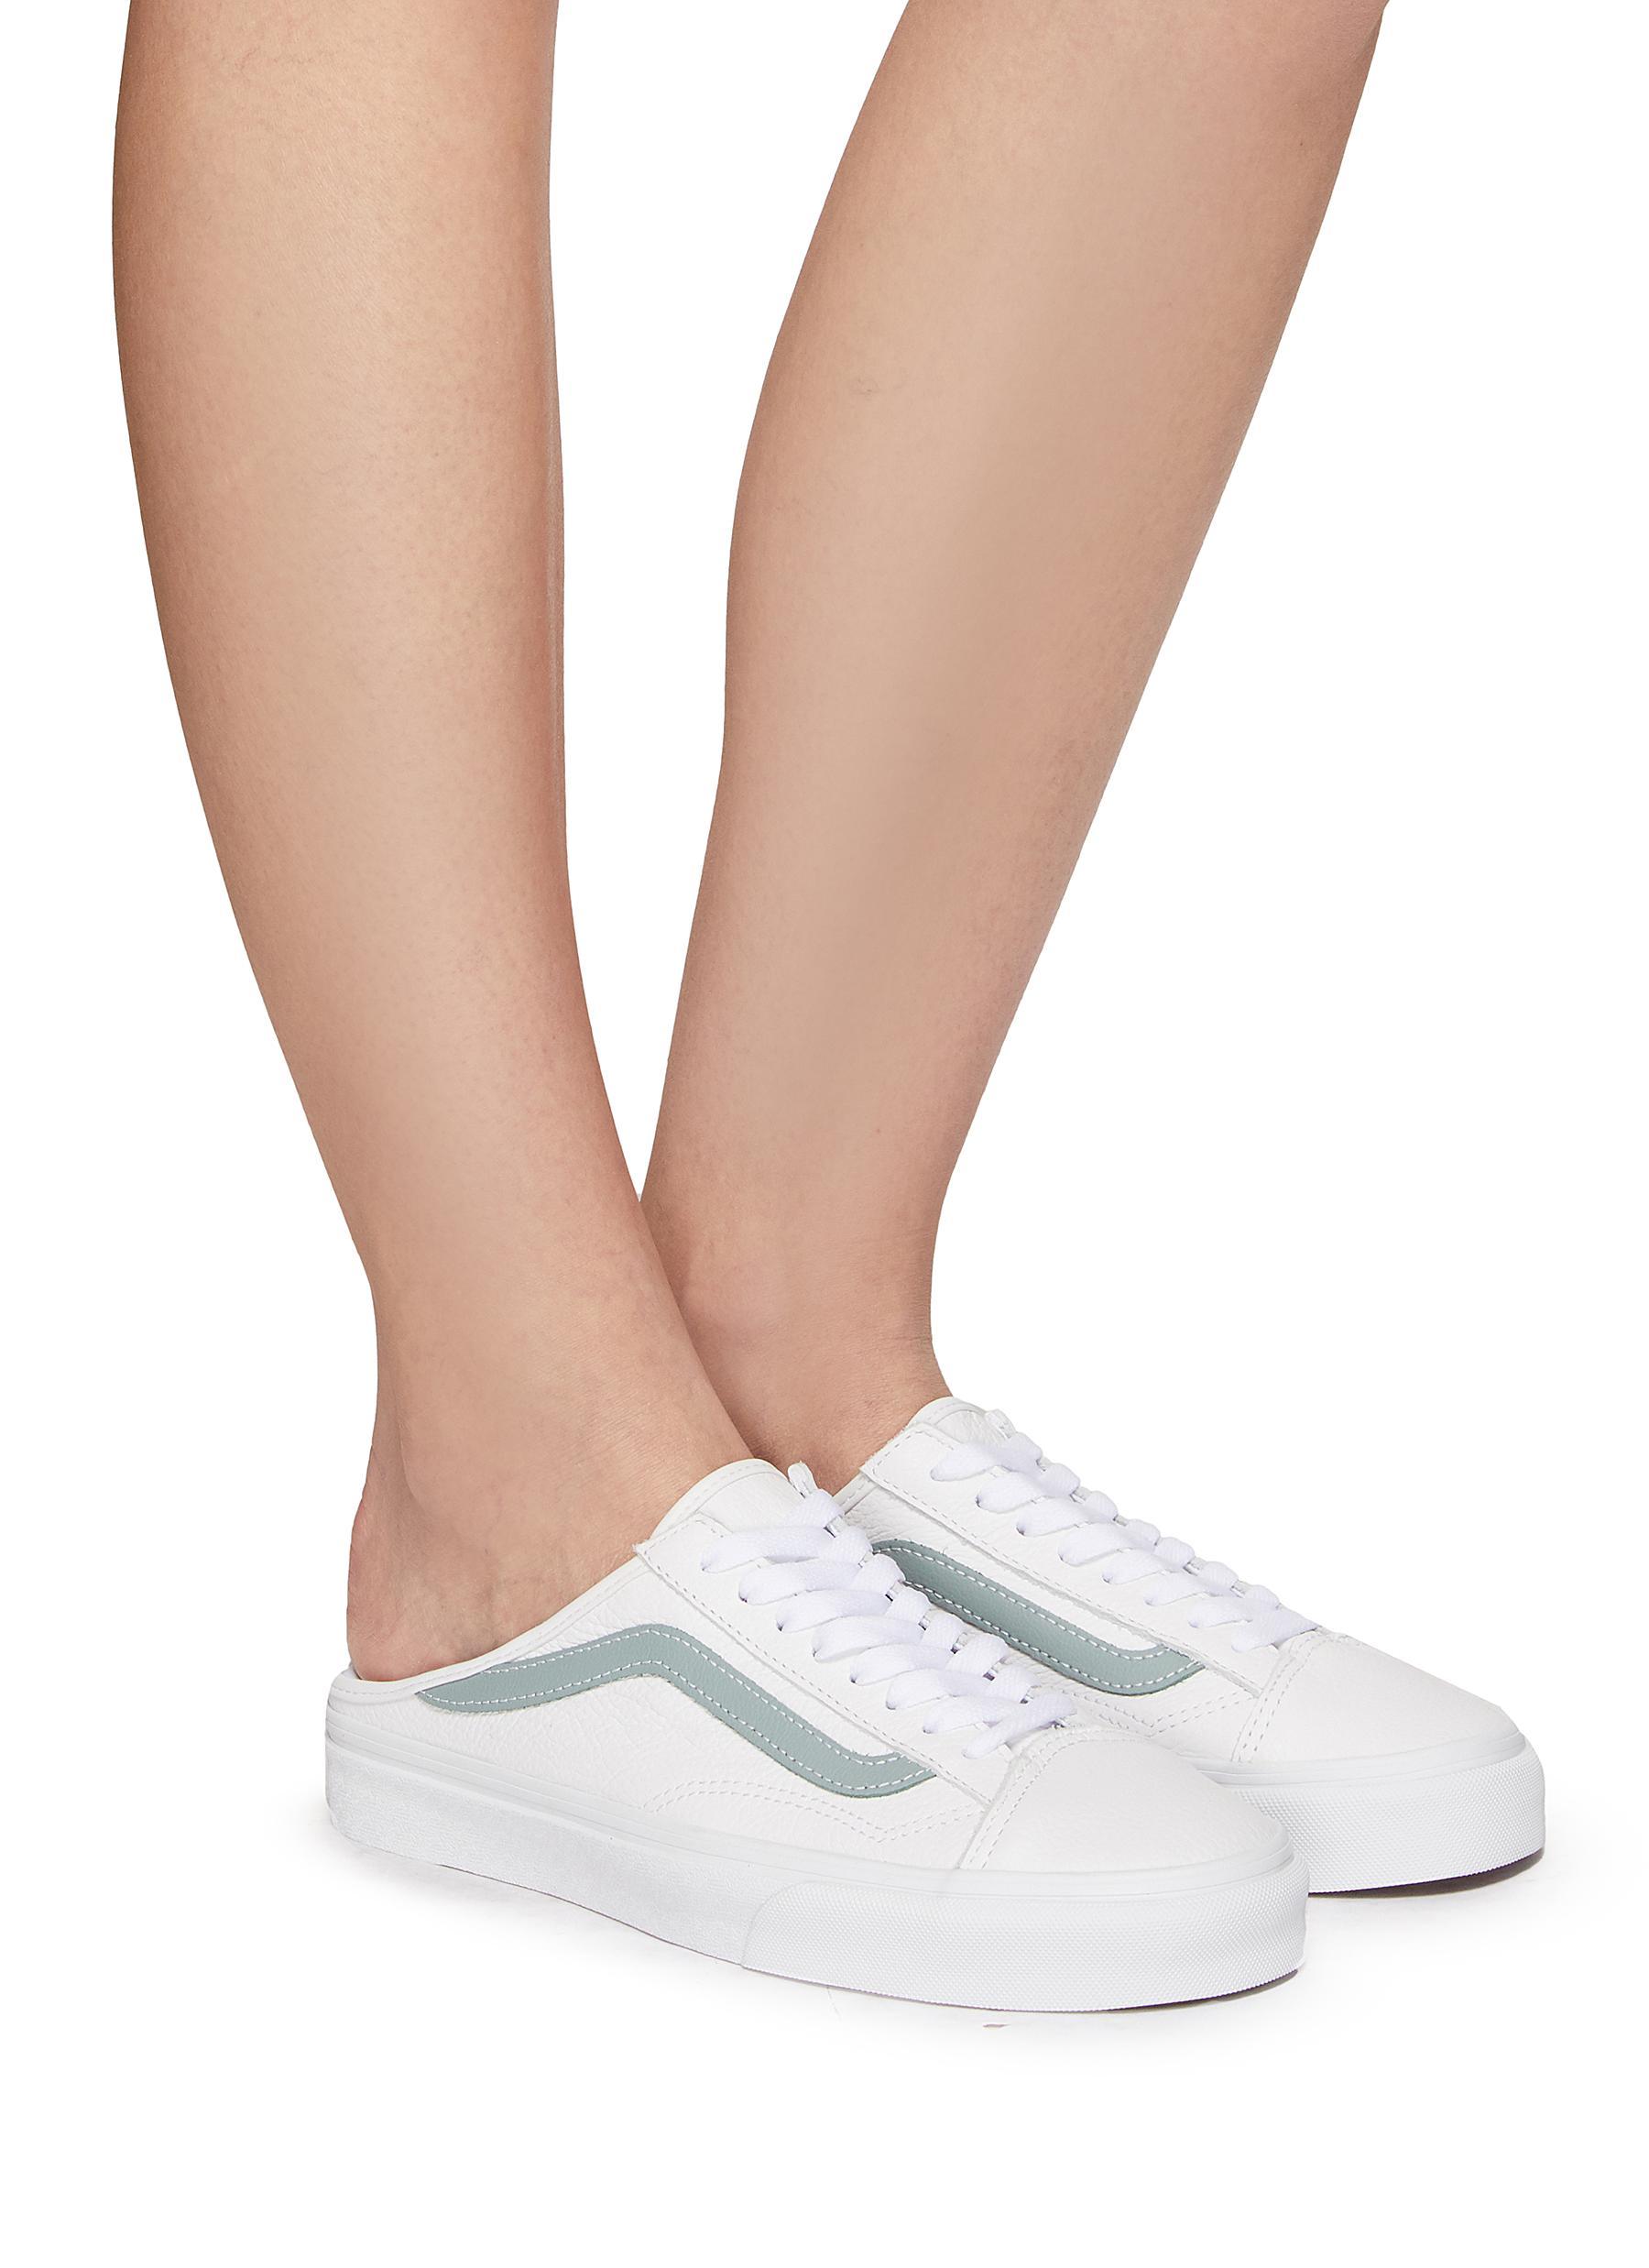 Vans 'style 36' Leather Lace Up Mules Women Shoes Sneakers Low-top 'style 36'  Leather Lace Up Mules in White | Lyst